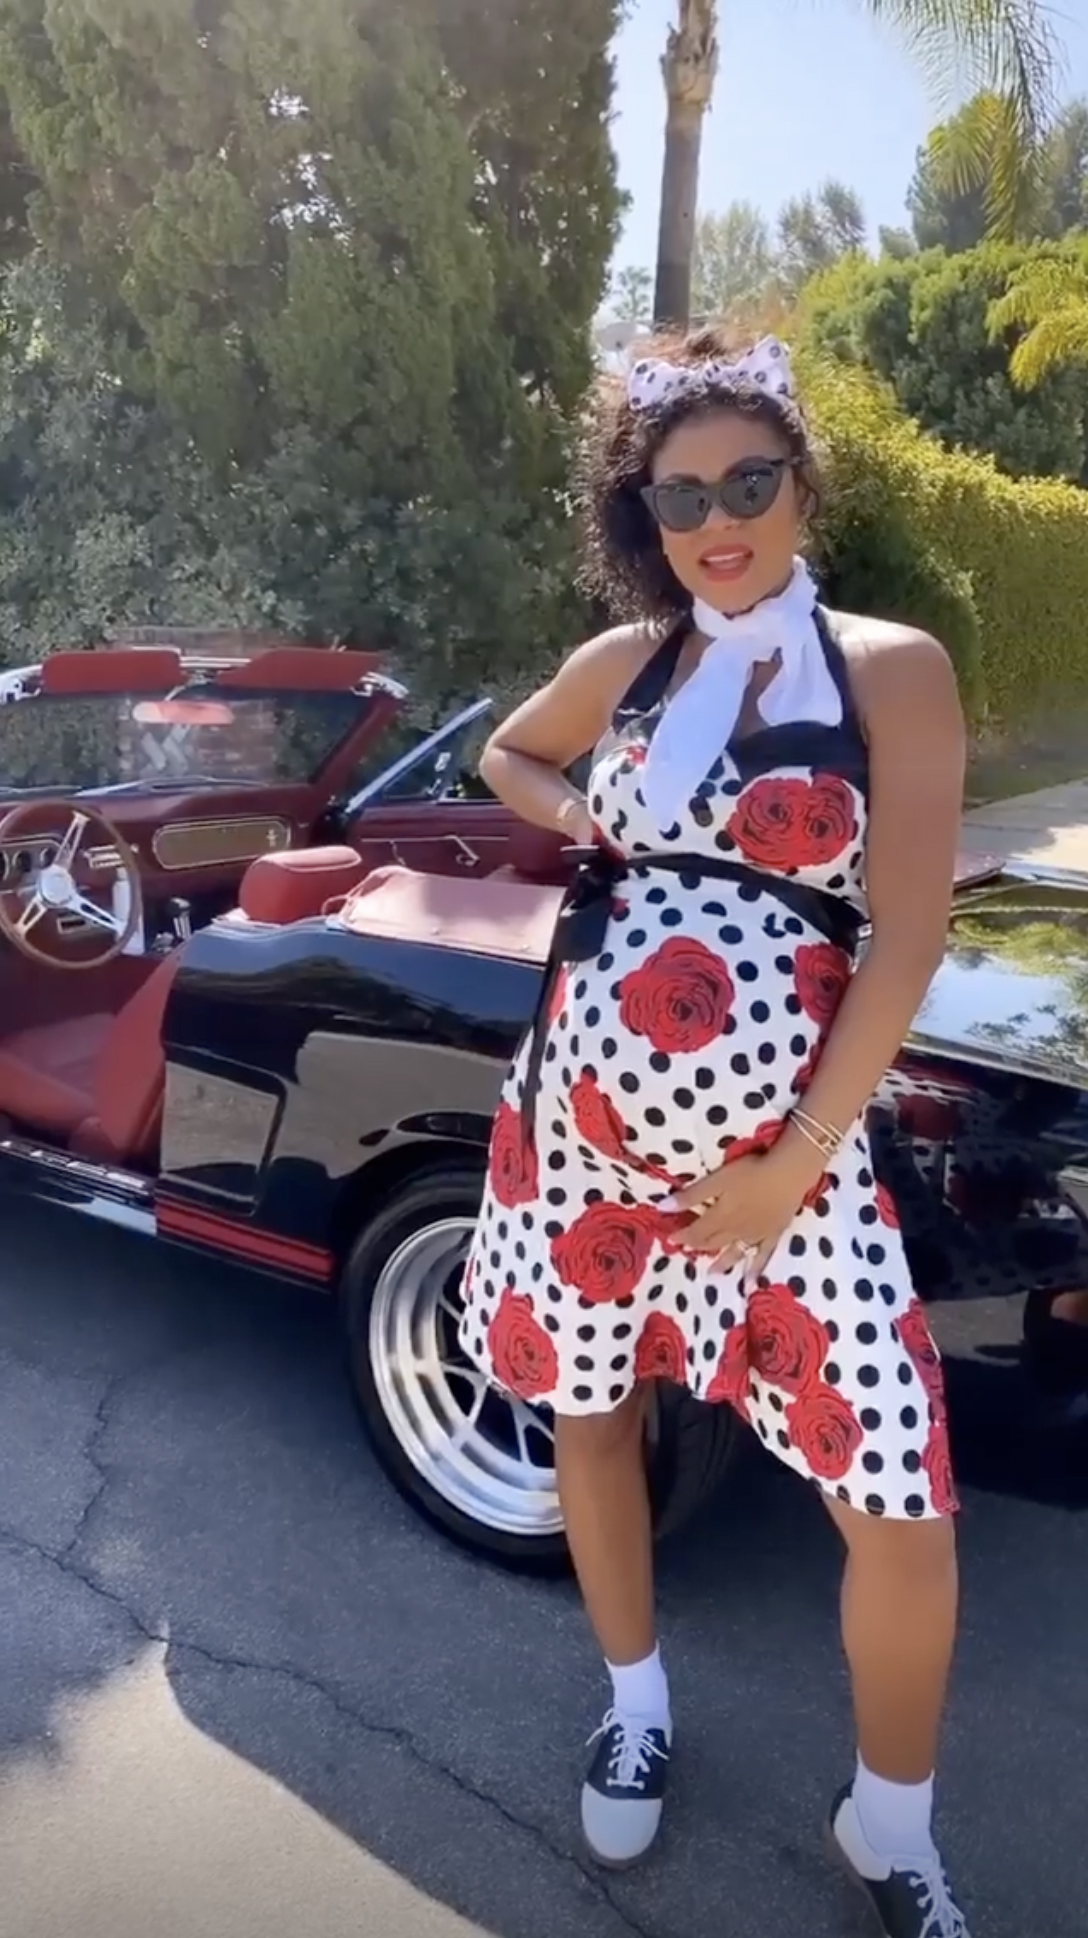 Kevin Hart snapped a sweet video of wife Eniko showing off her growing baby bump ahead of the 50's-themed brunch date on Sunday, Sept. 20, 2020.